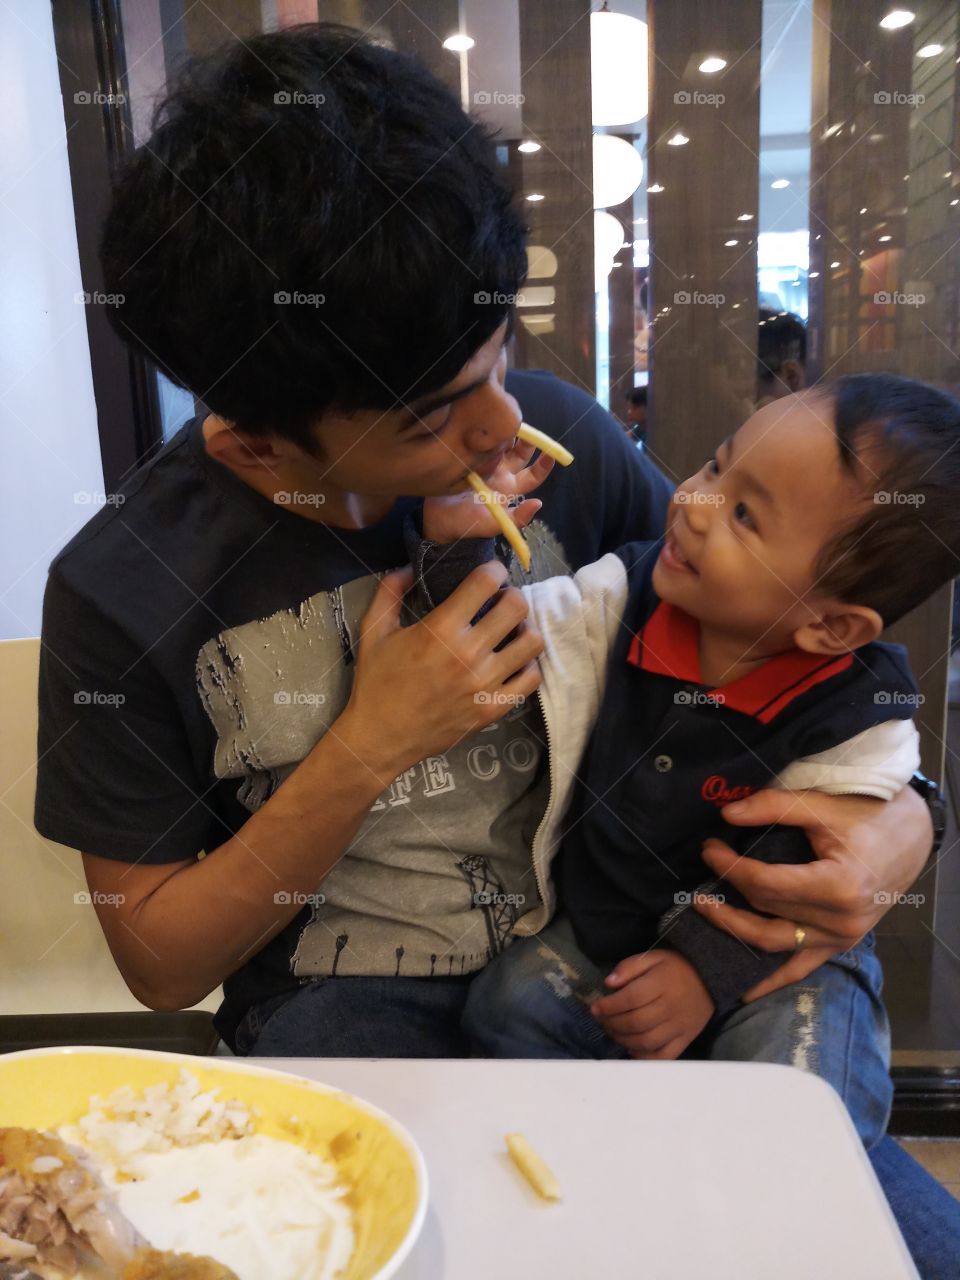 father and son moment in a fastfood chain. The son is so happy while the father is doing funny faces